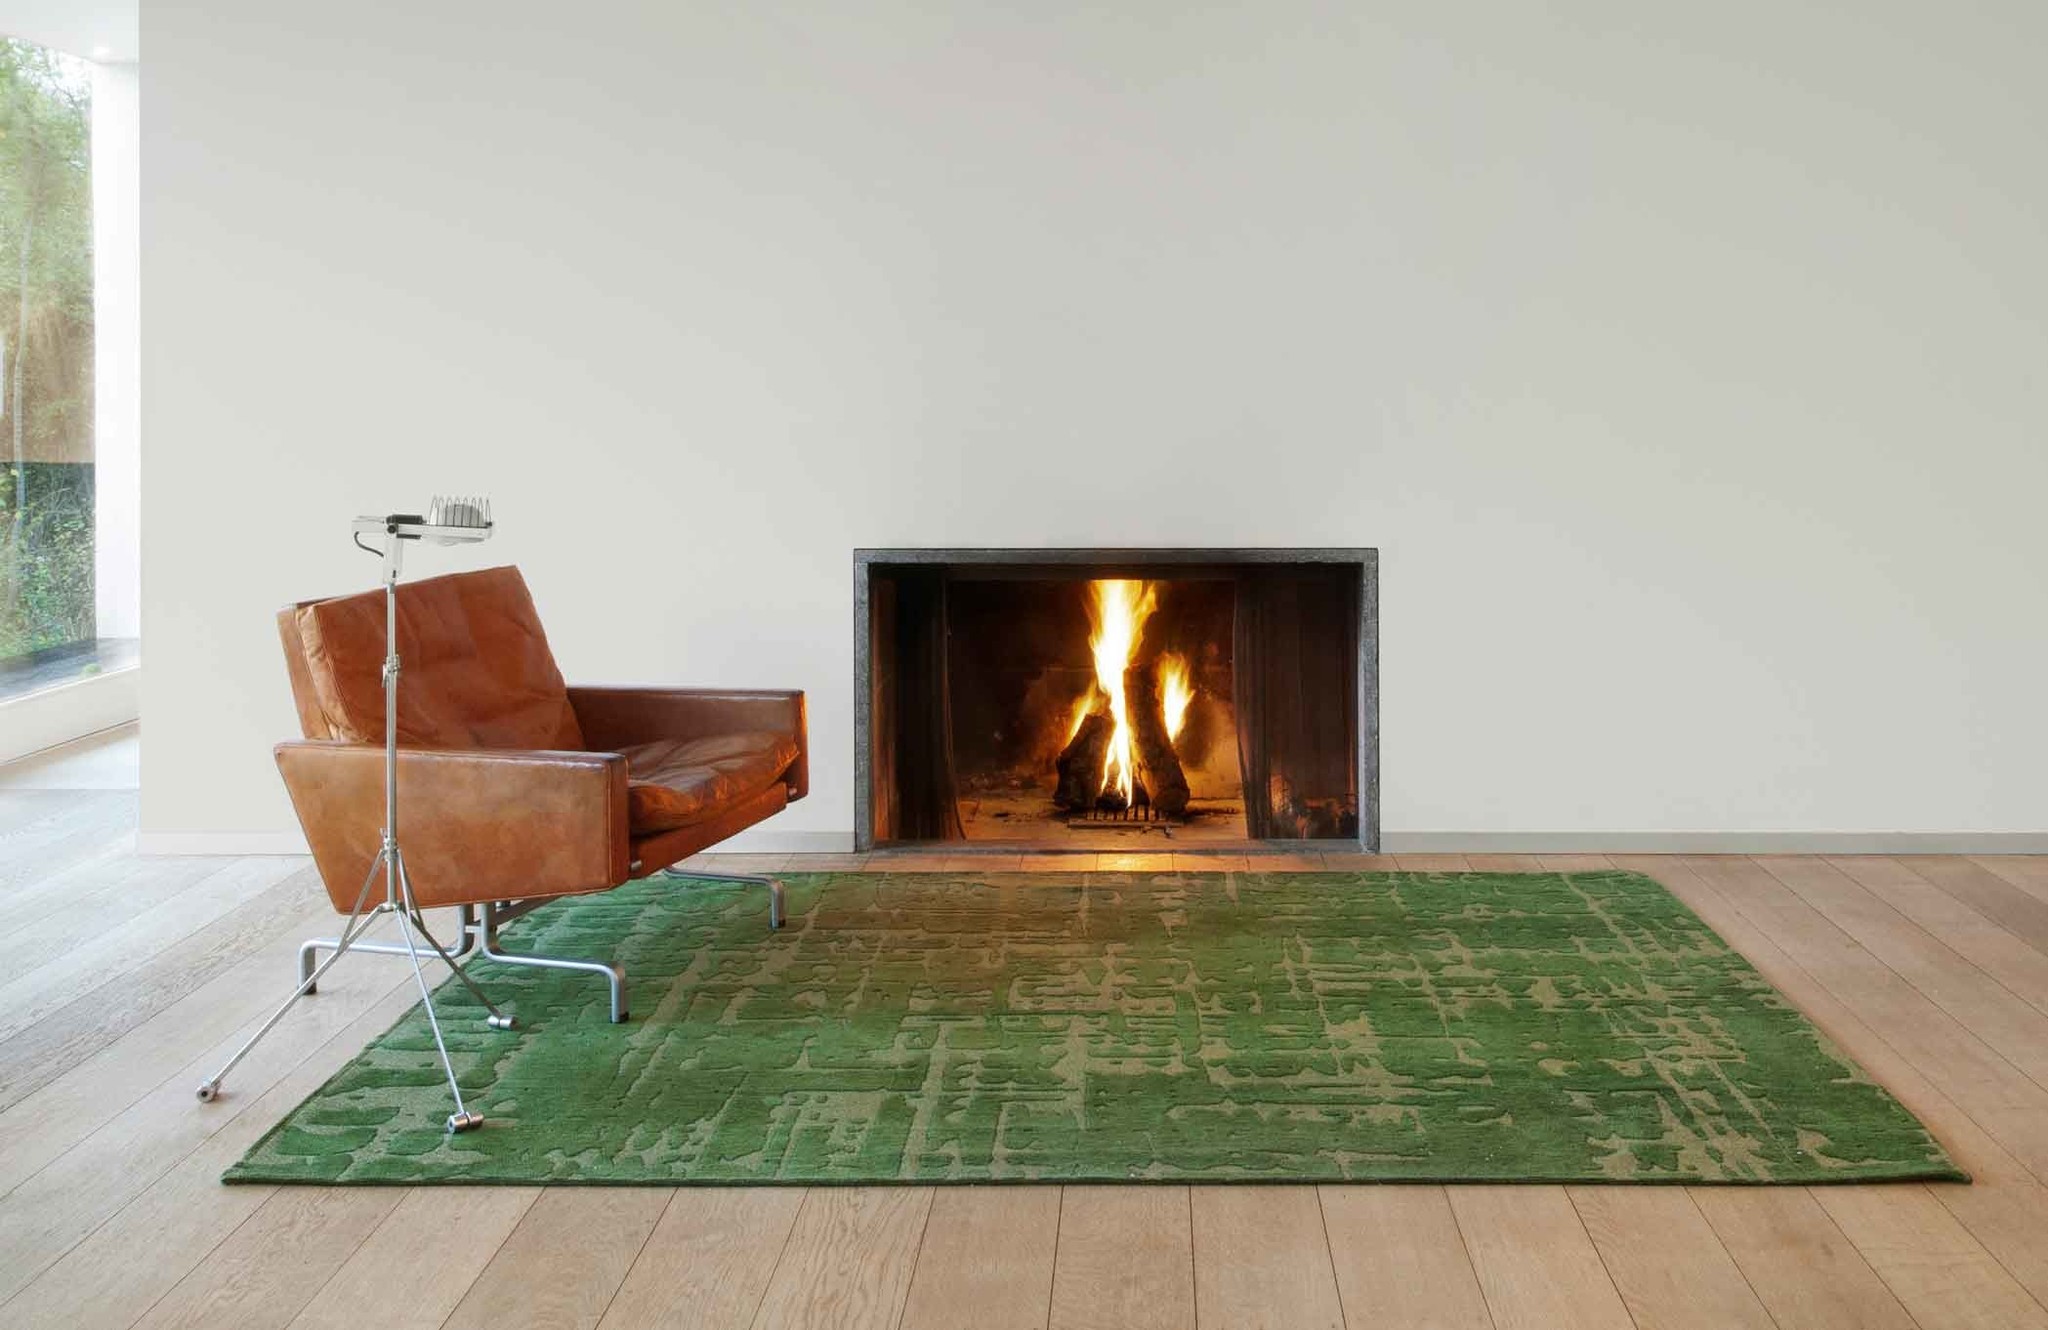 Abstract Green Belgian Rug ☞ Size: 2' 7" x 5' (80 x 150 cm)